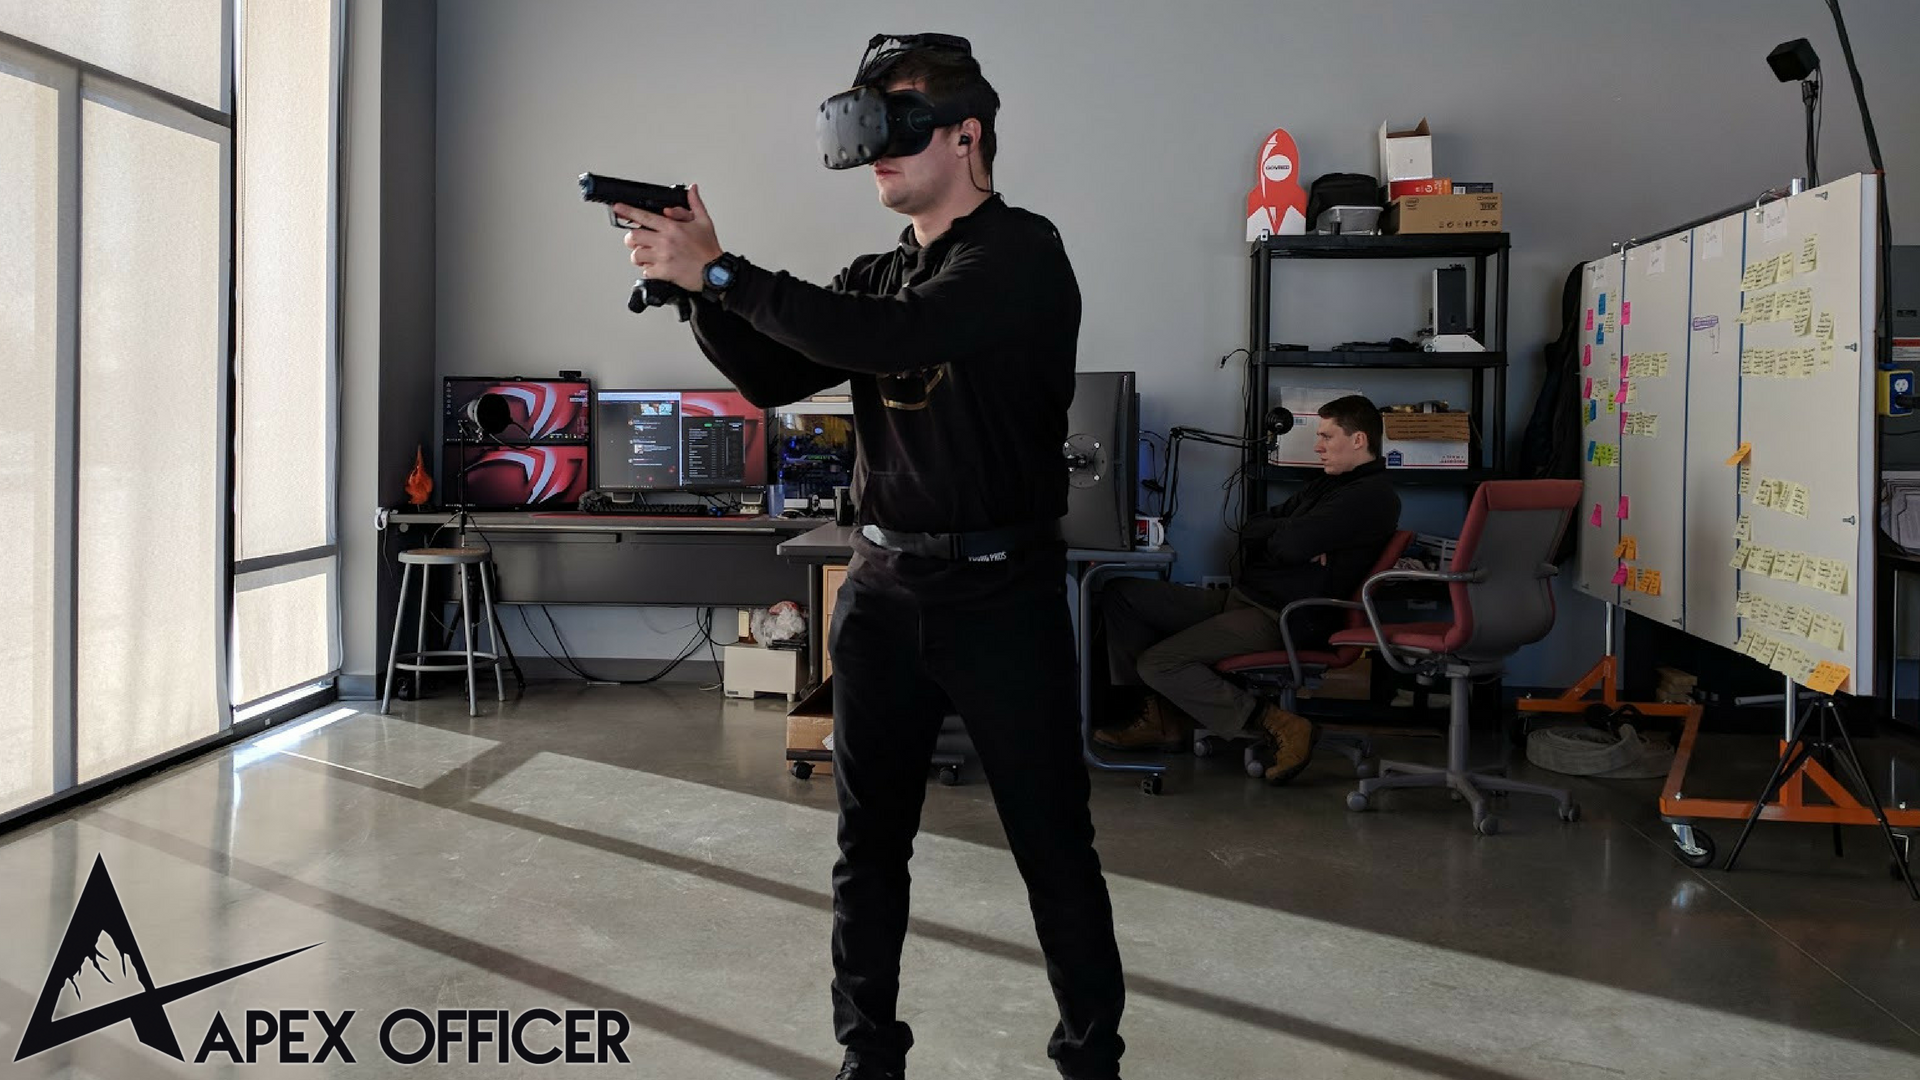 Demoing APEX Officer’s Wireless Virtual Reality Training Platform Featuring TPCast.